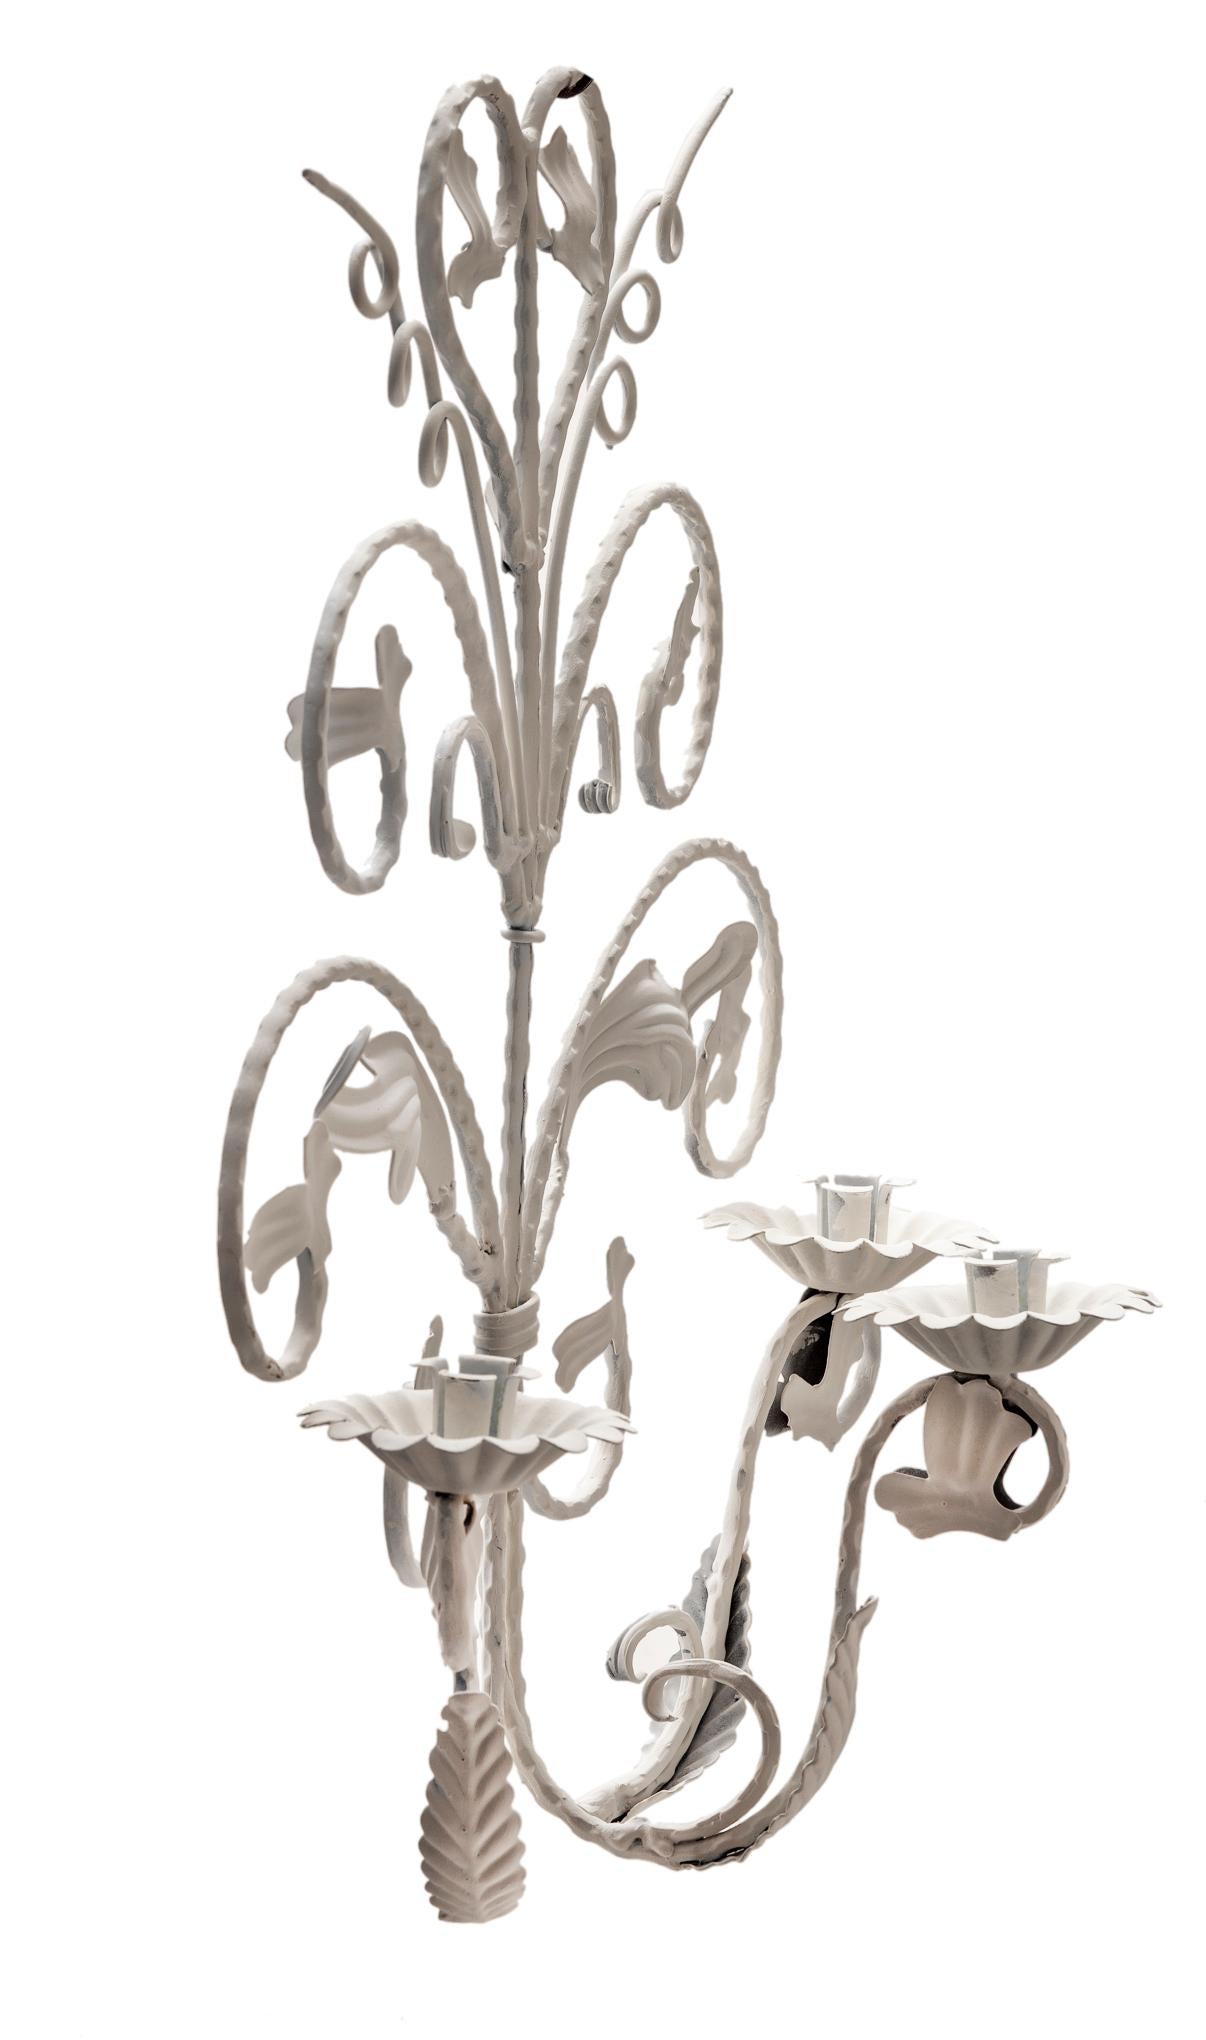 Rustic White Iron Candlestick Wall Scones Pair For Sale